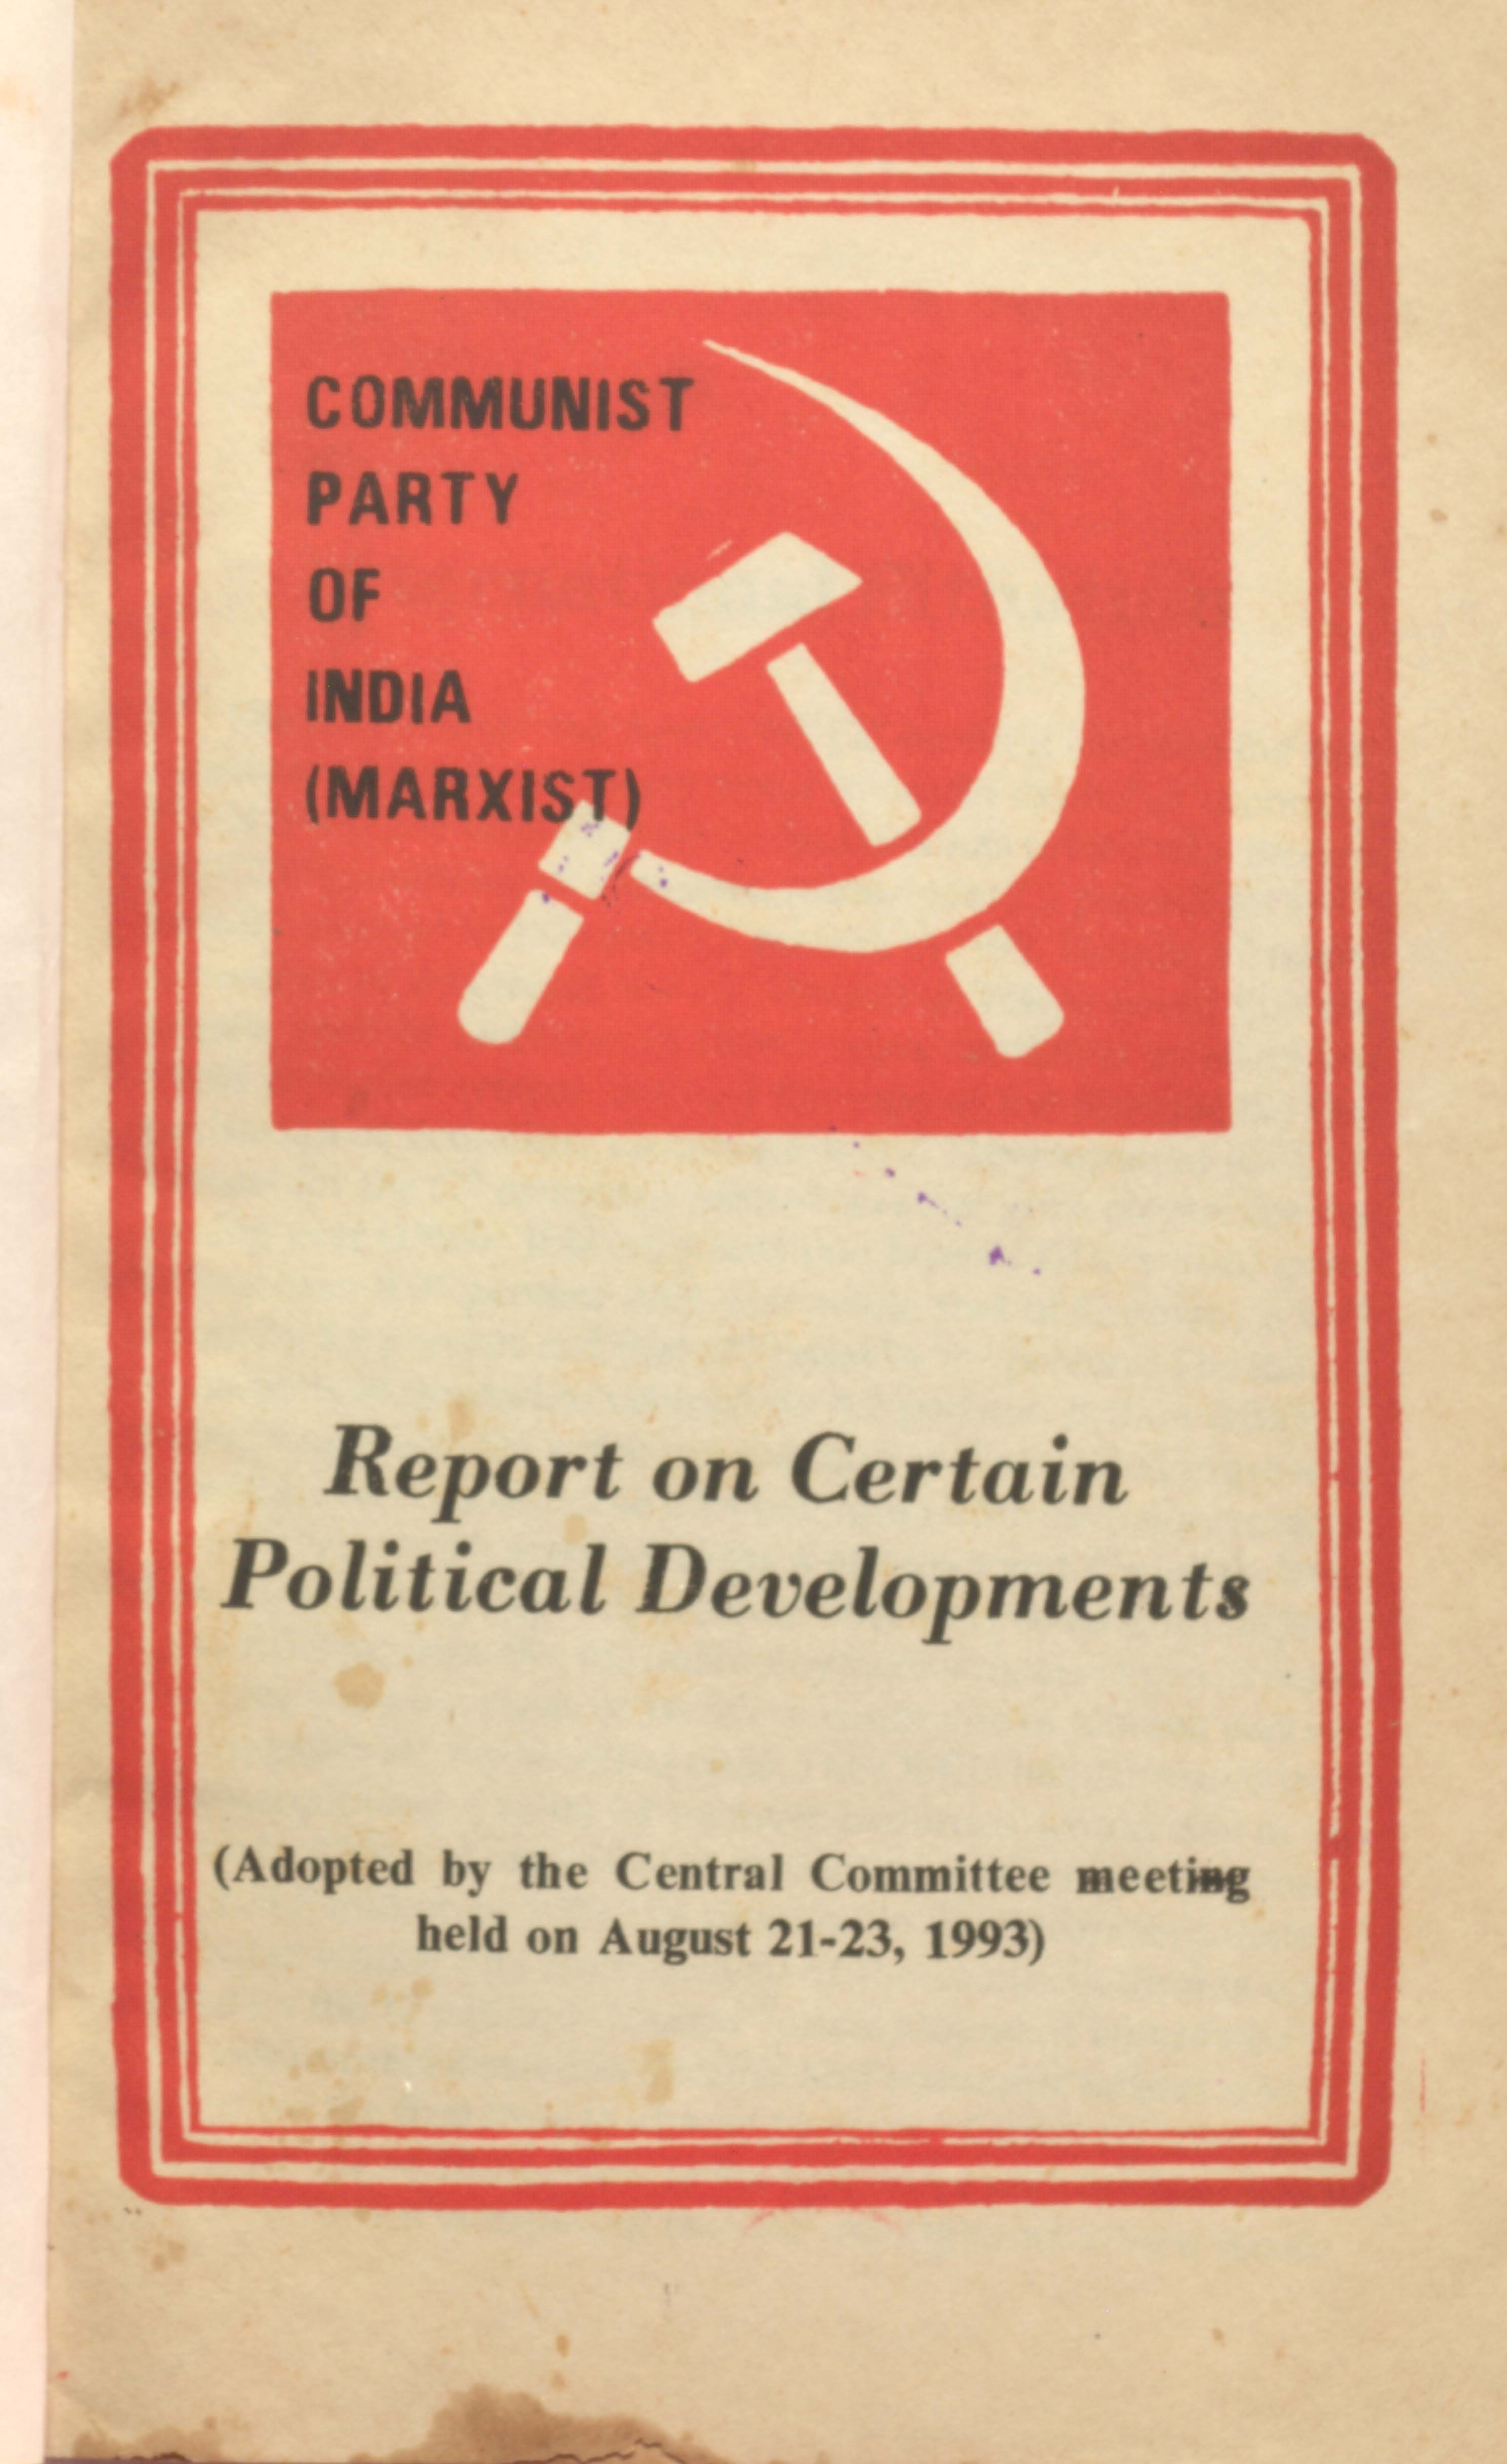 Report on Organisation adopted by the Plenam of the Central Committee